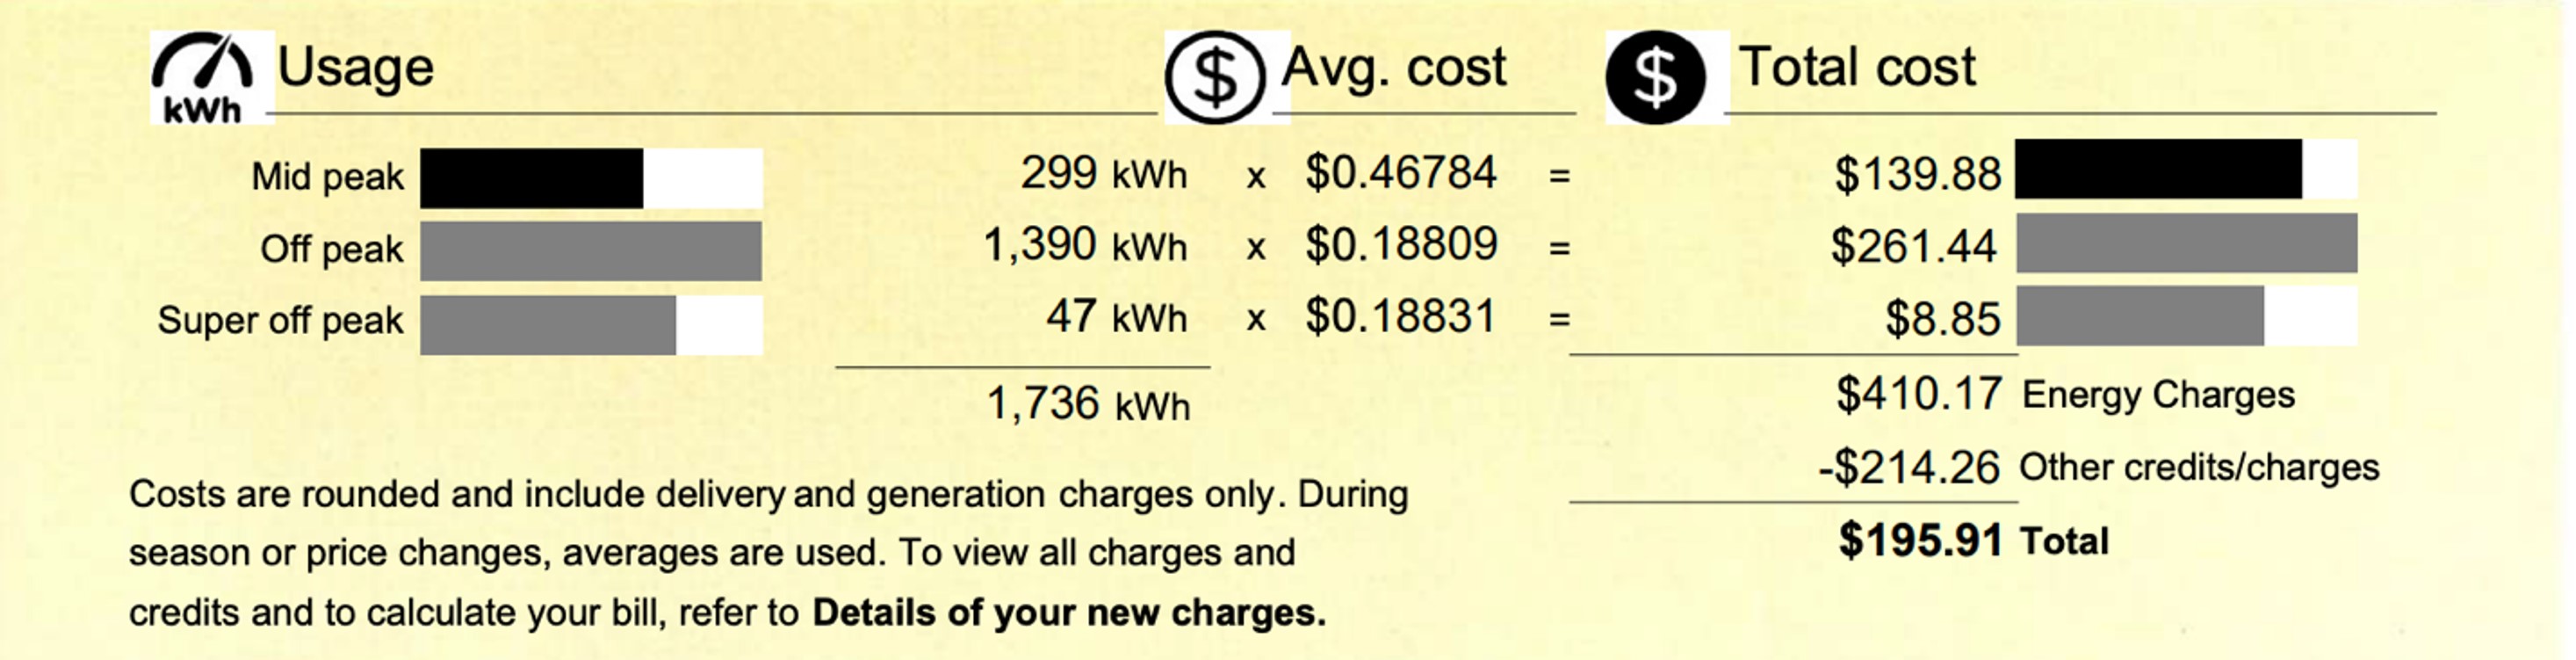 SCE bill example TOU information image